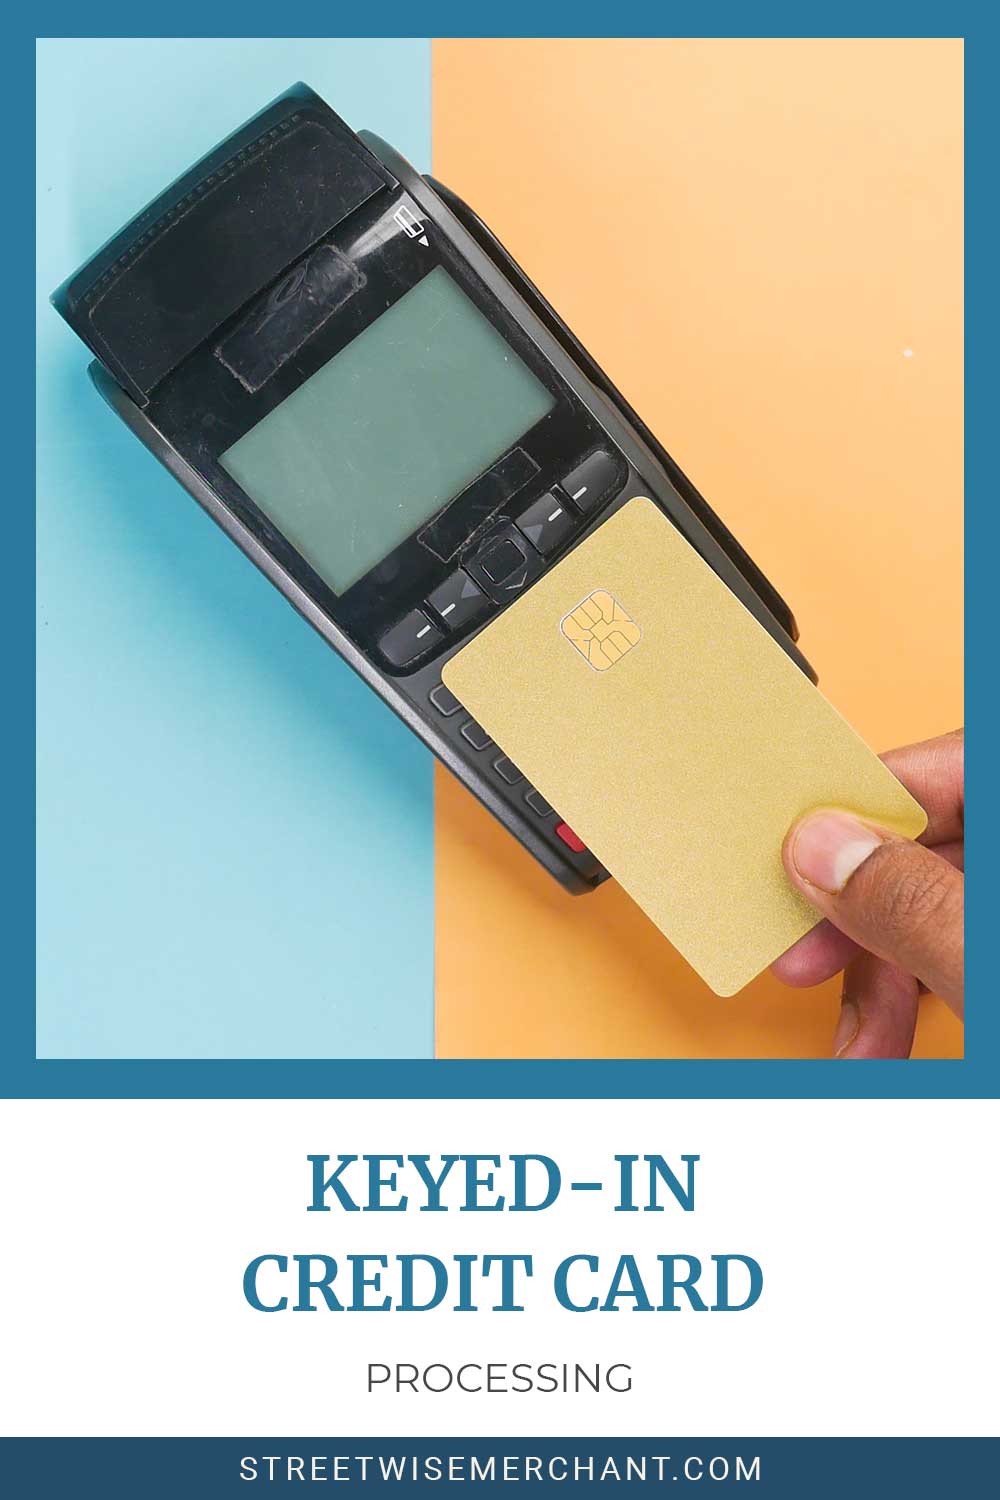 Credit card over a POS payment processing machine - Keyed-In Credit Card Processing.